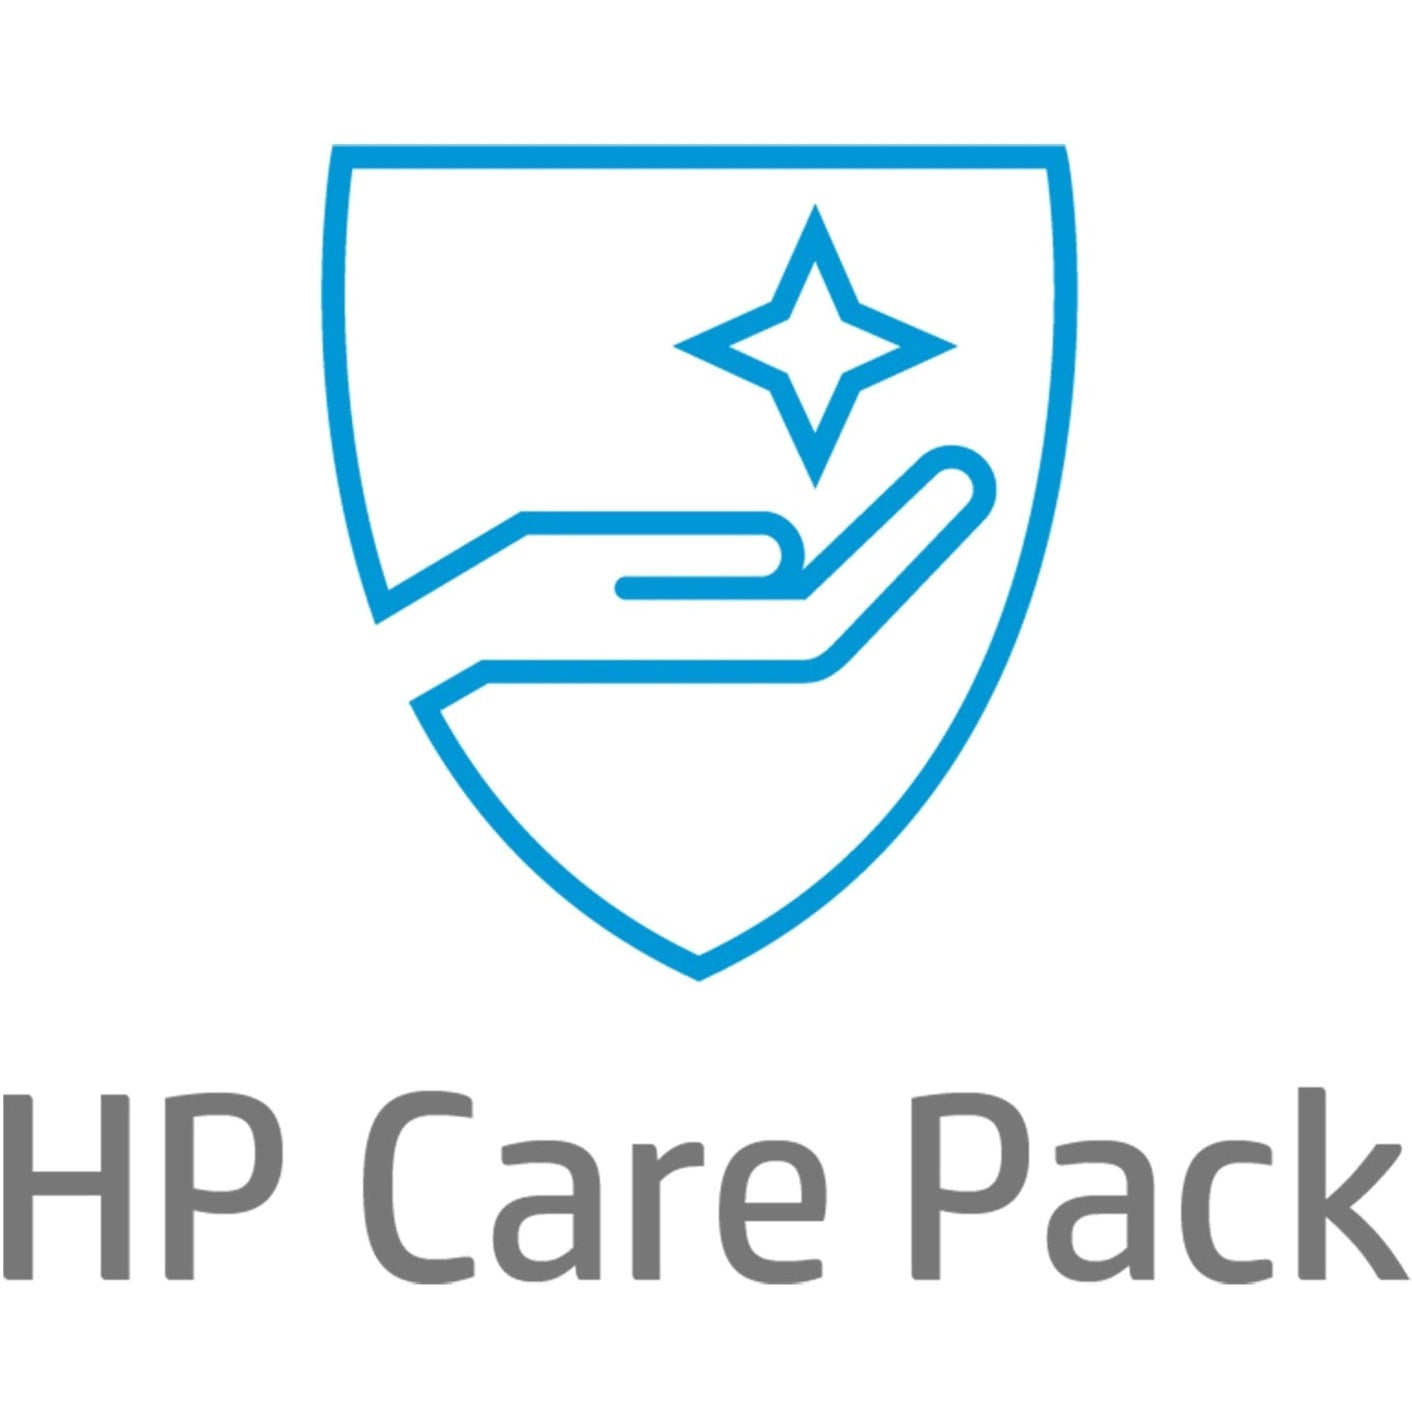 HP Care Pack - Extended Service - 3 Year - Service (UA6G9E)